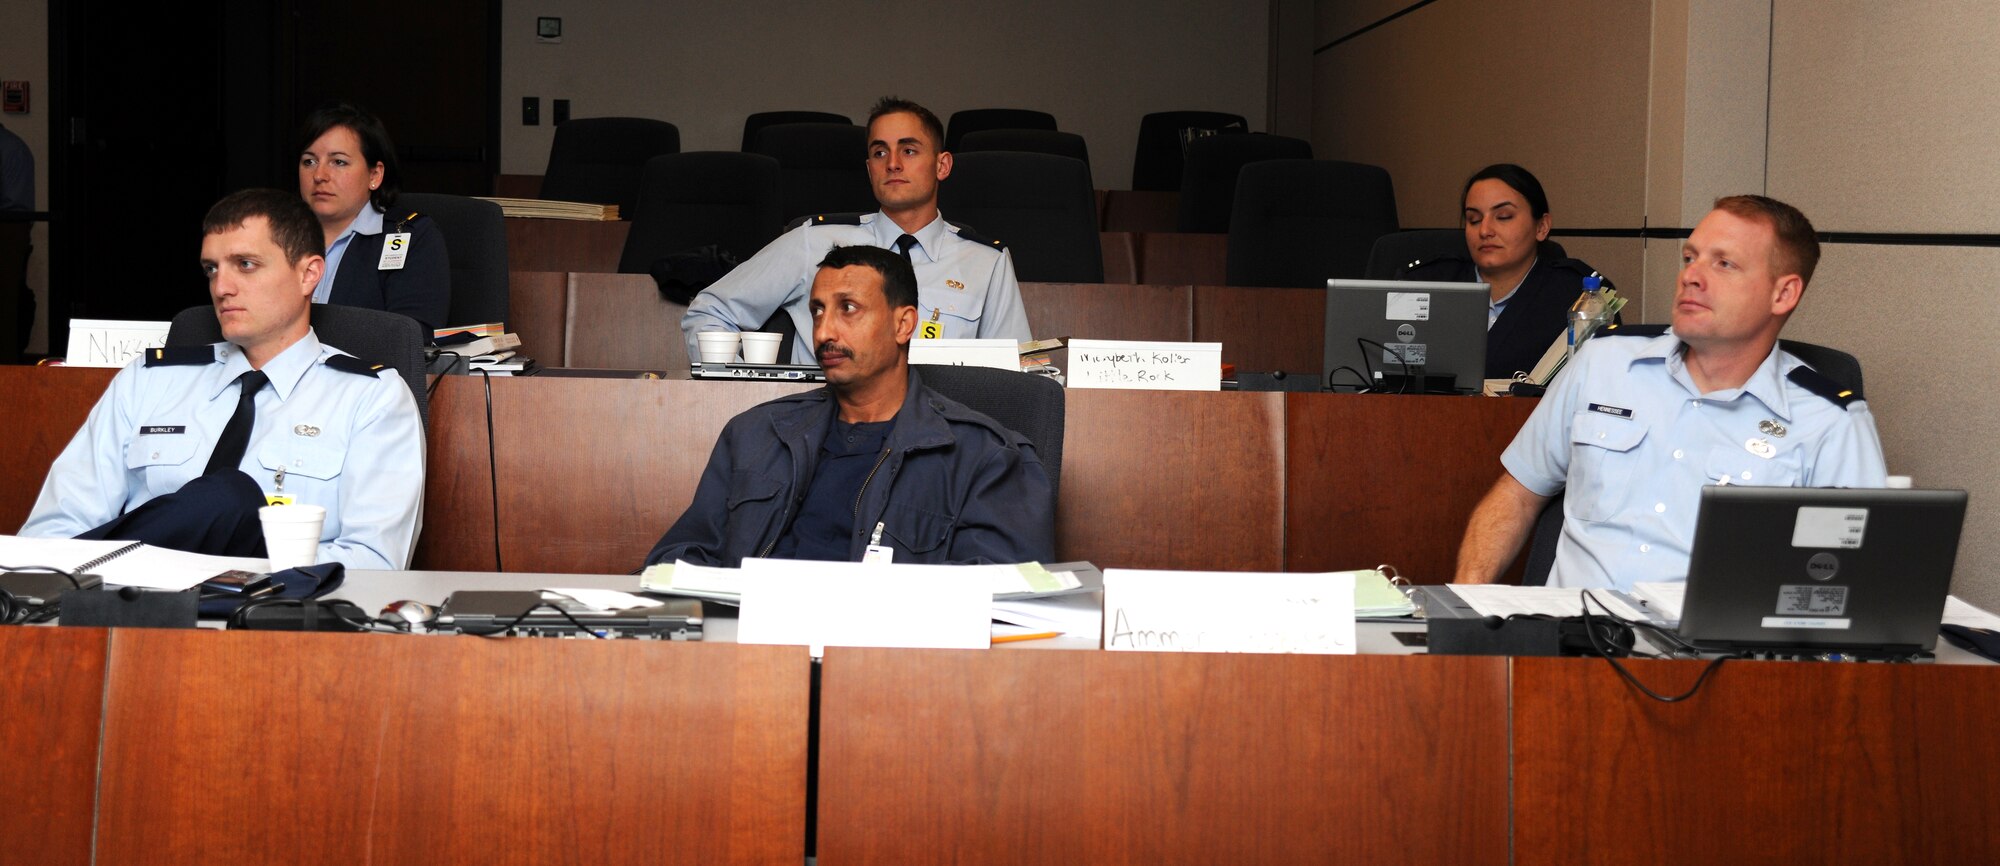 Yemeni Air Force Captain Abdurabu Al Matari joins 10 U.S. Air Force maintenance officers receiving in-depth training on aircraft maintenance management at the U.S. Air Force Expeditionary Center's Maintenance Officer Course.  The course provides a strategic communication opportunity for the USAF EC. (U.S. Air Force photo/SSgt Veuril K. McDavid)